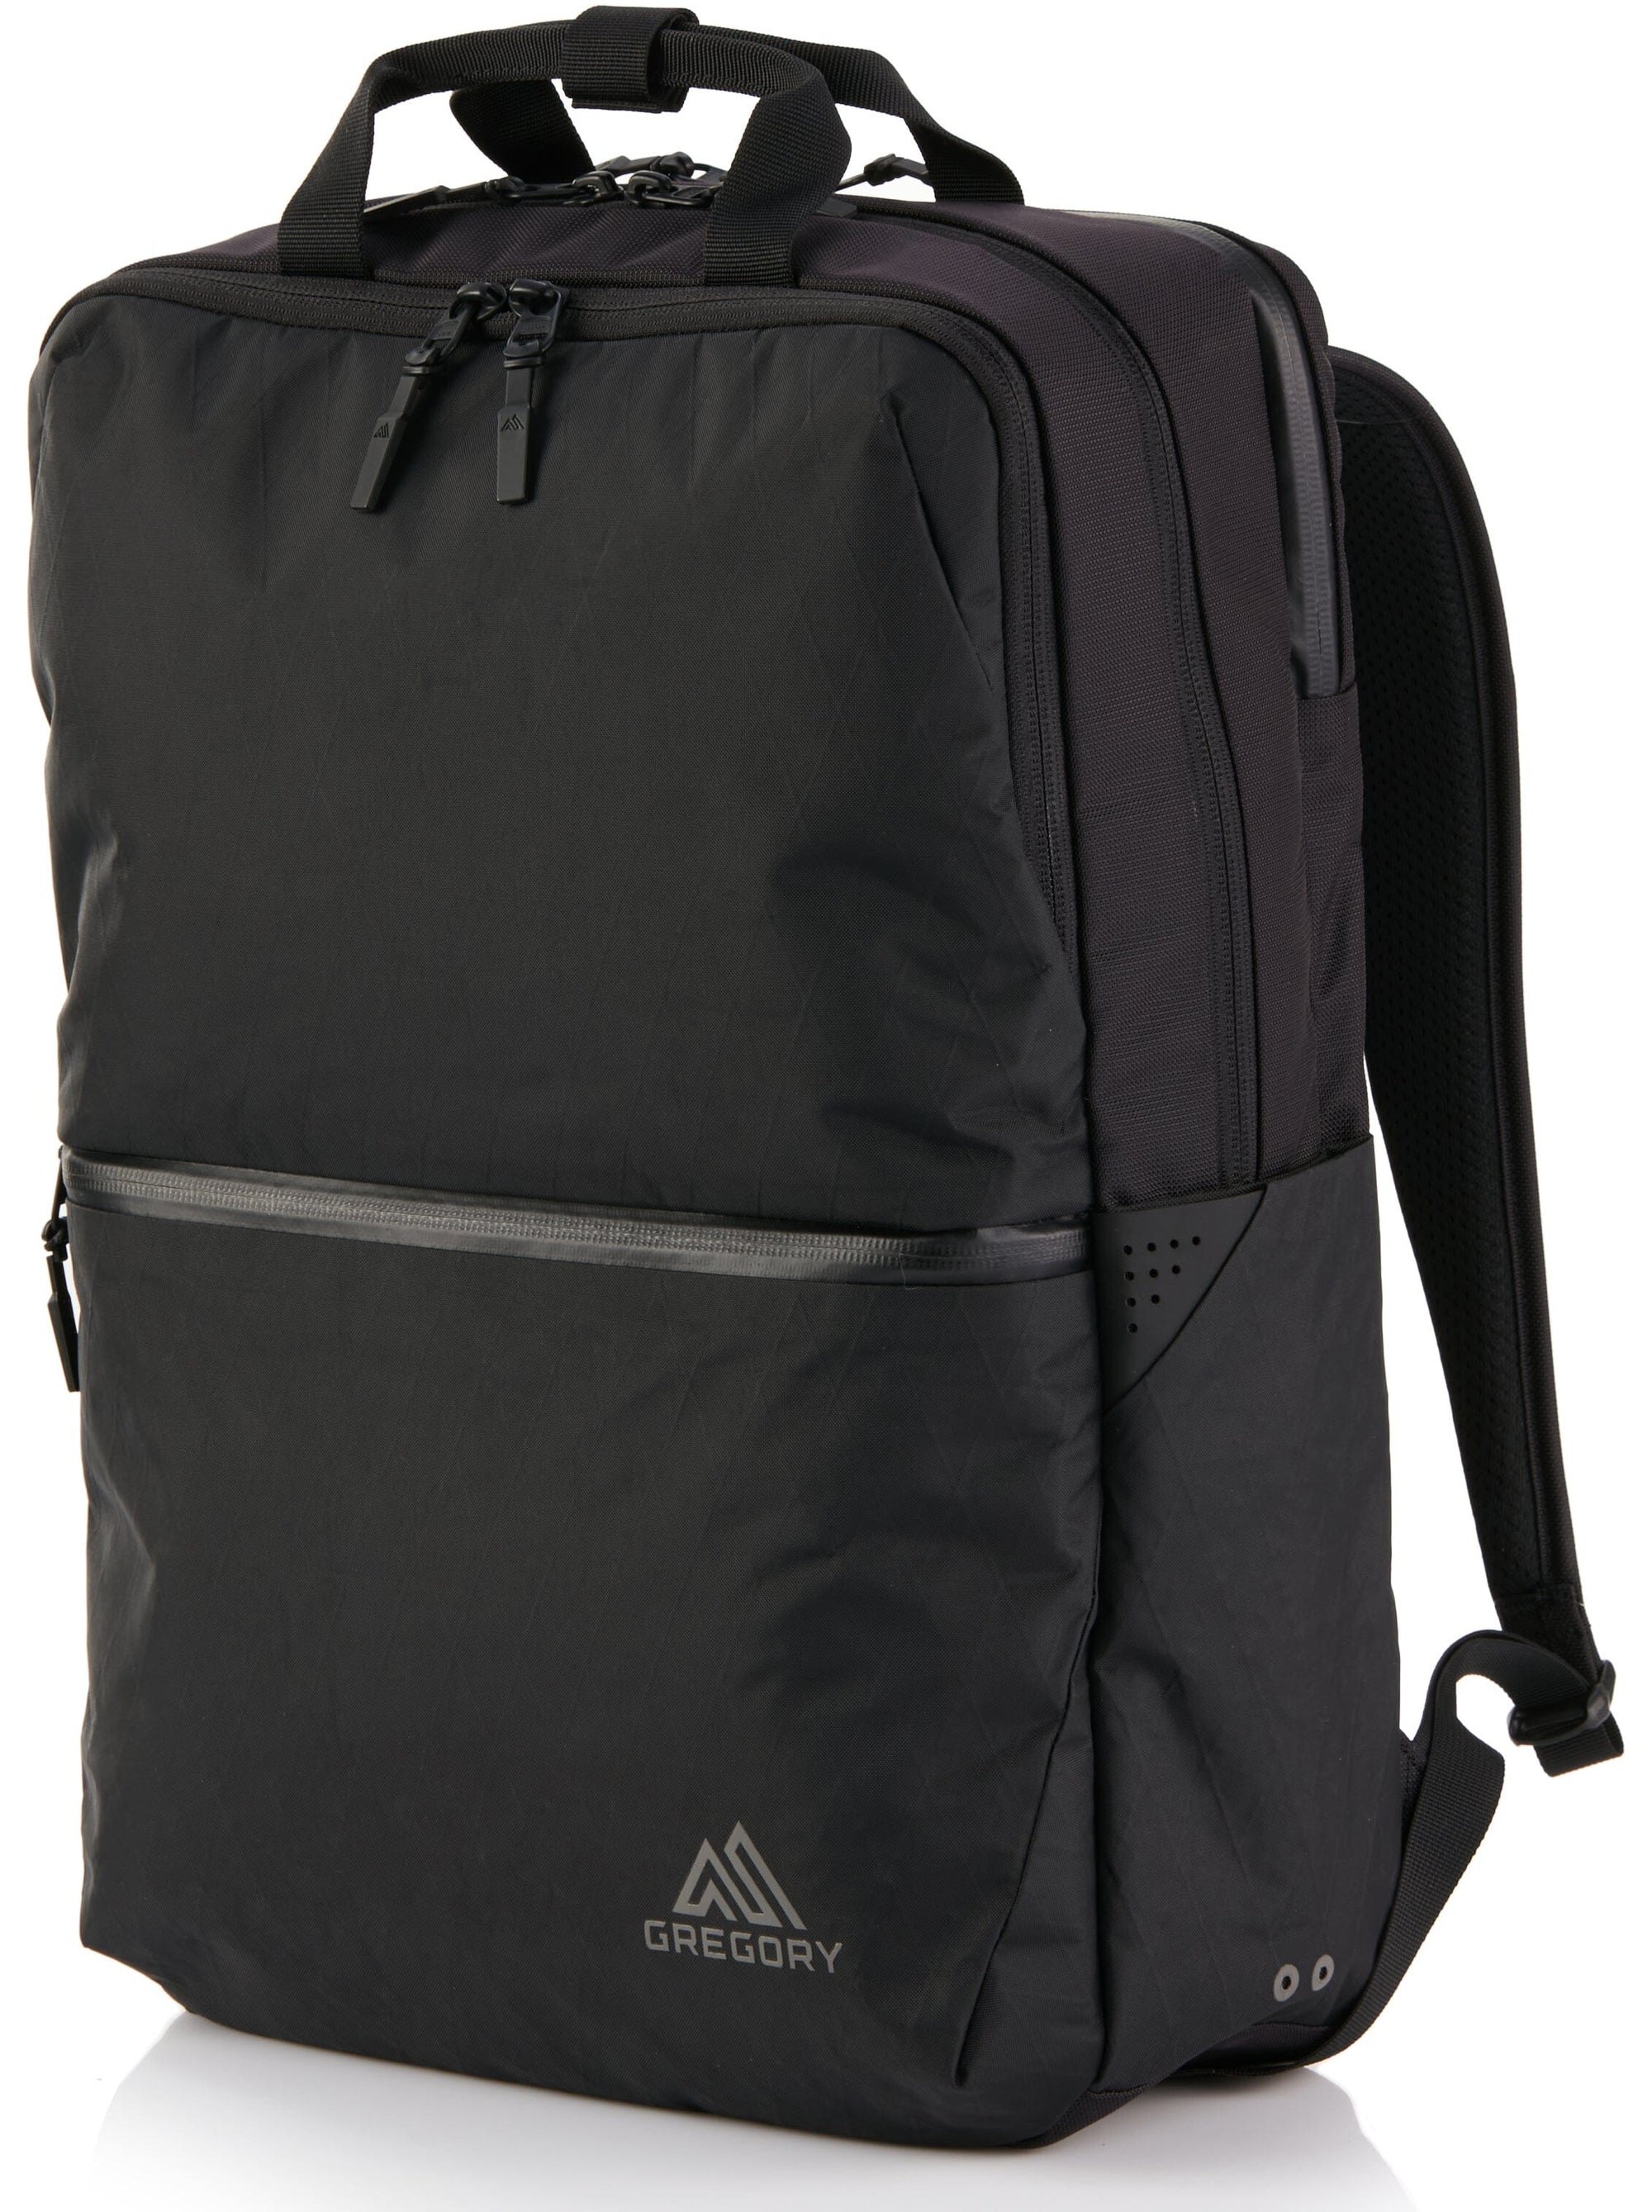 Gregory Commute Day Backpack XP Black 